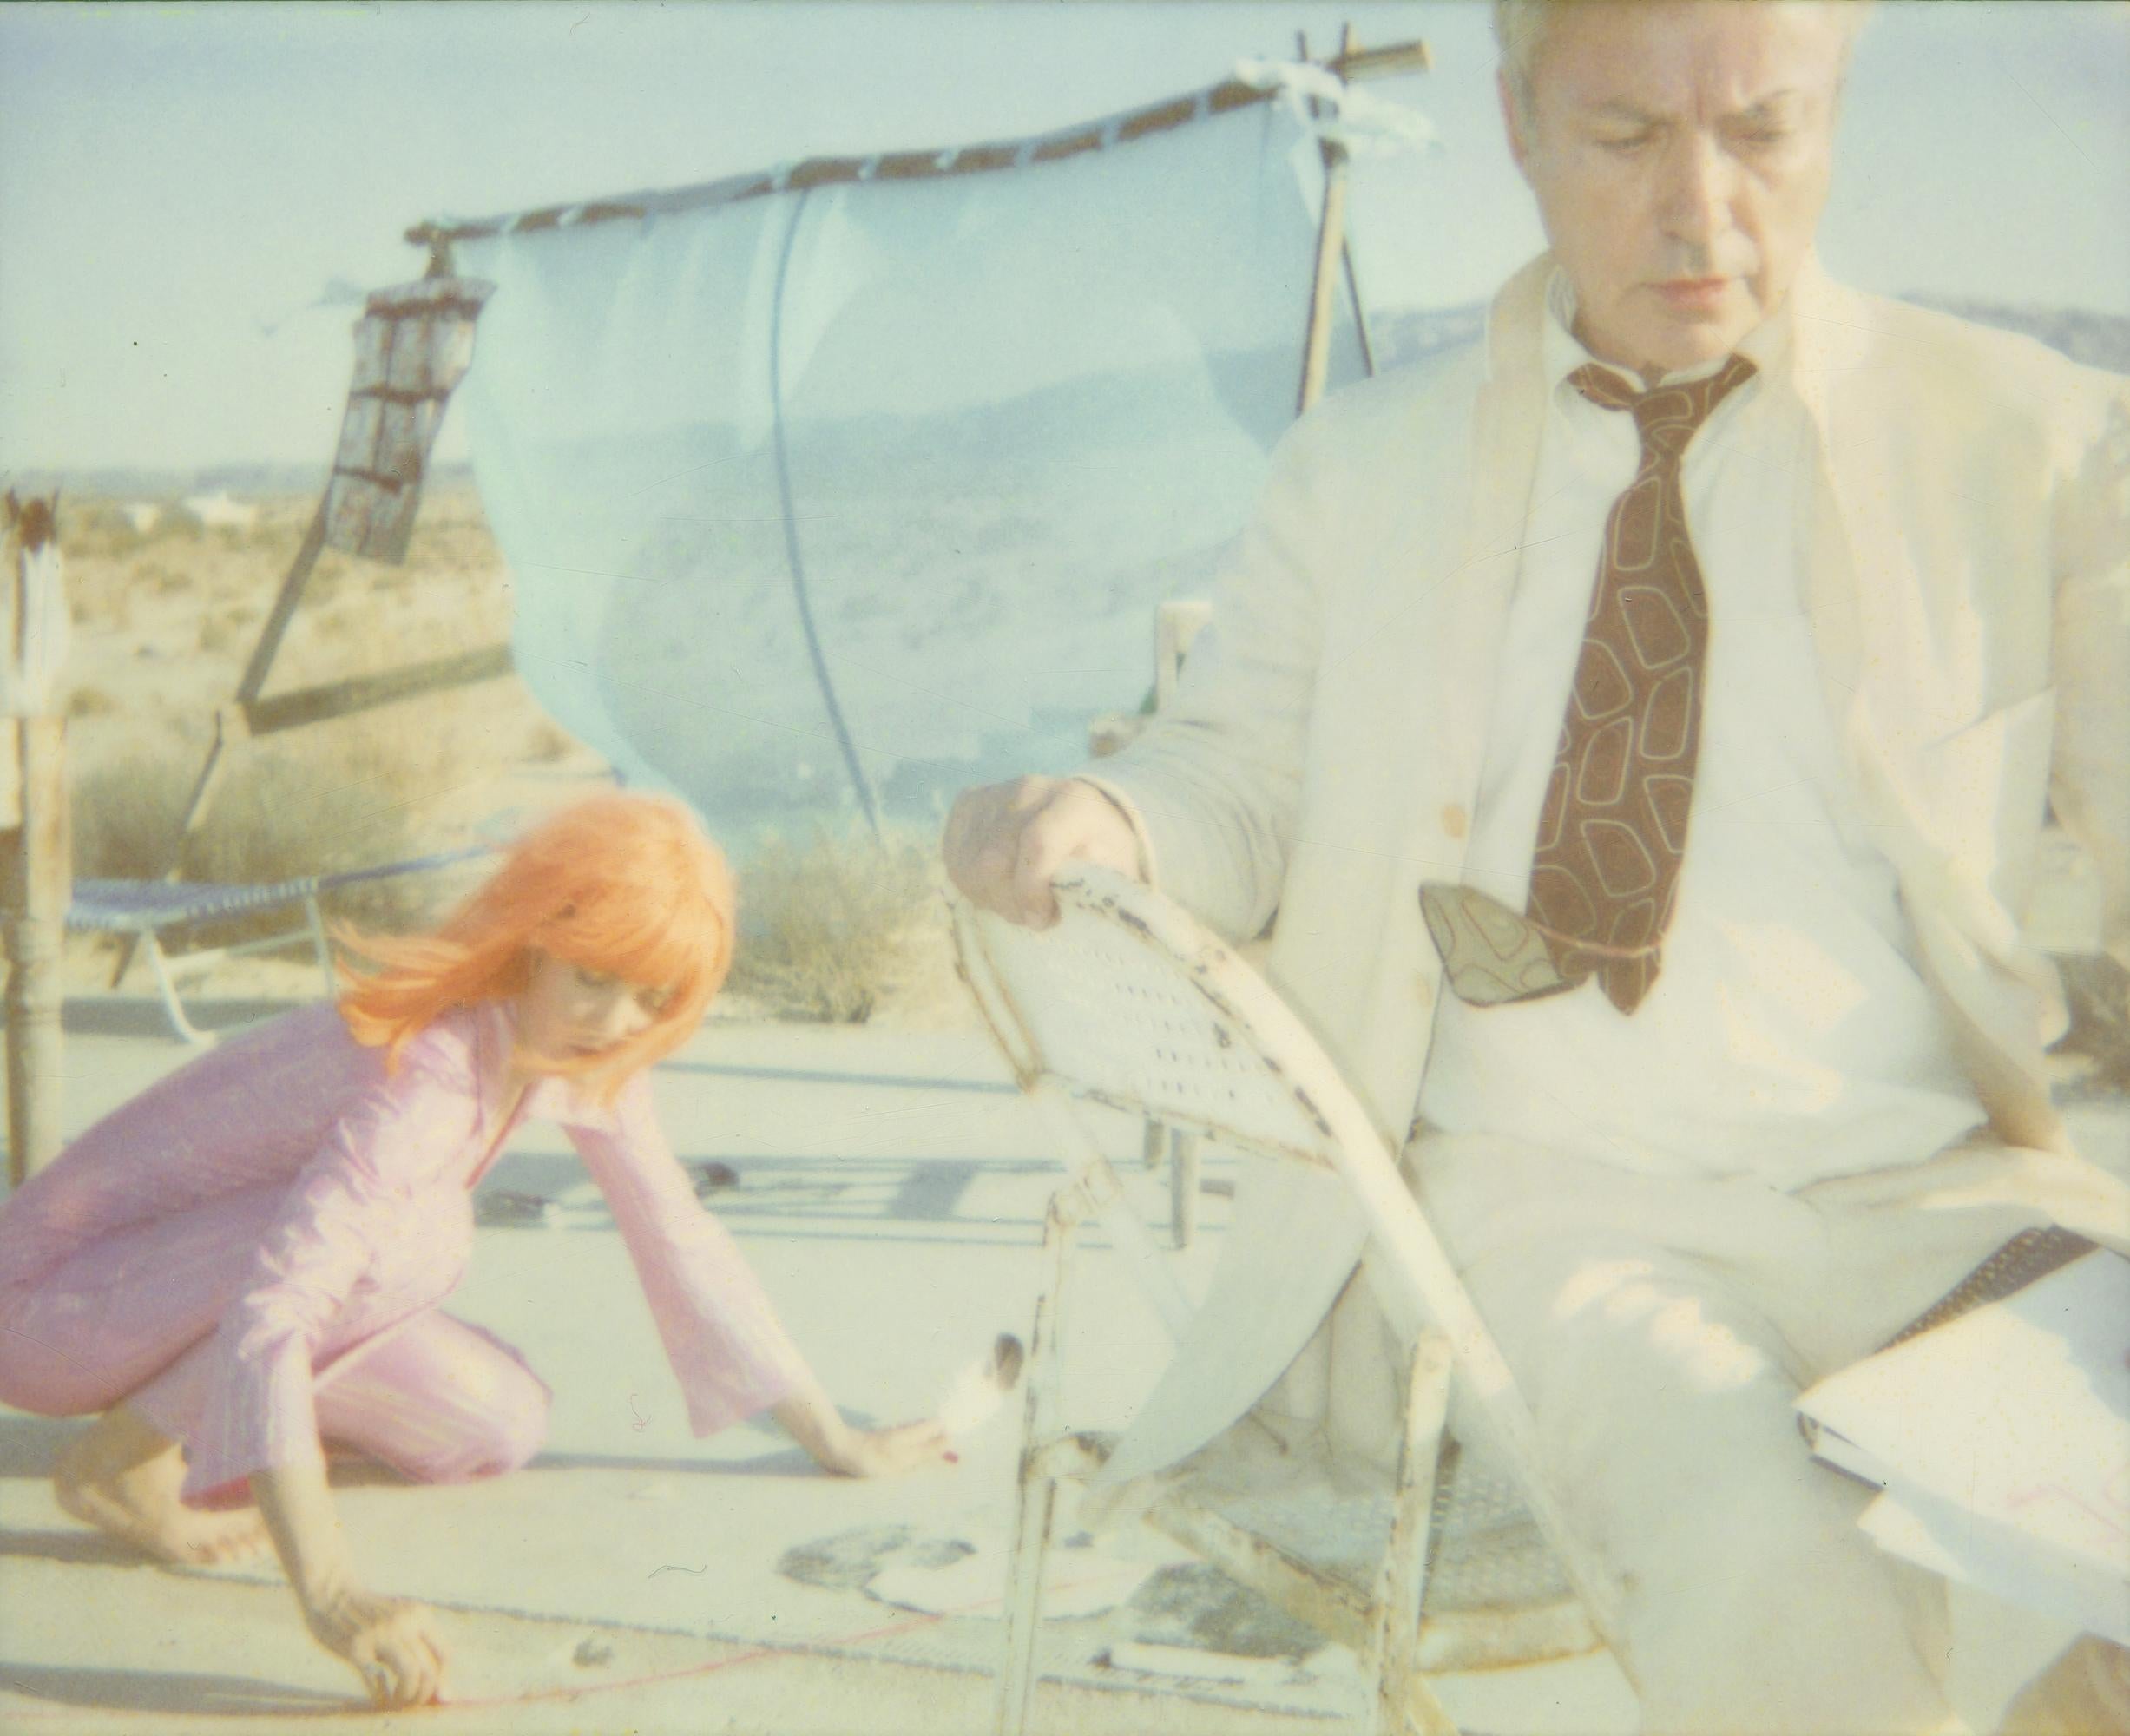 Stefanie Schneider Color Photograph - Blowin' In The Wind (Stage of Consciousness) - featuring Udo Kier, Radha Mitchel